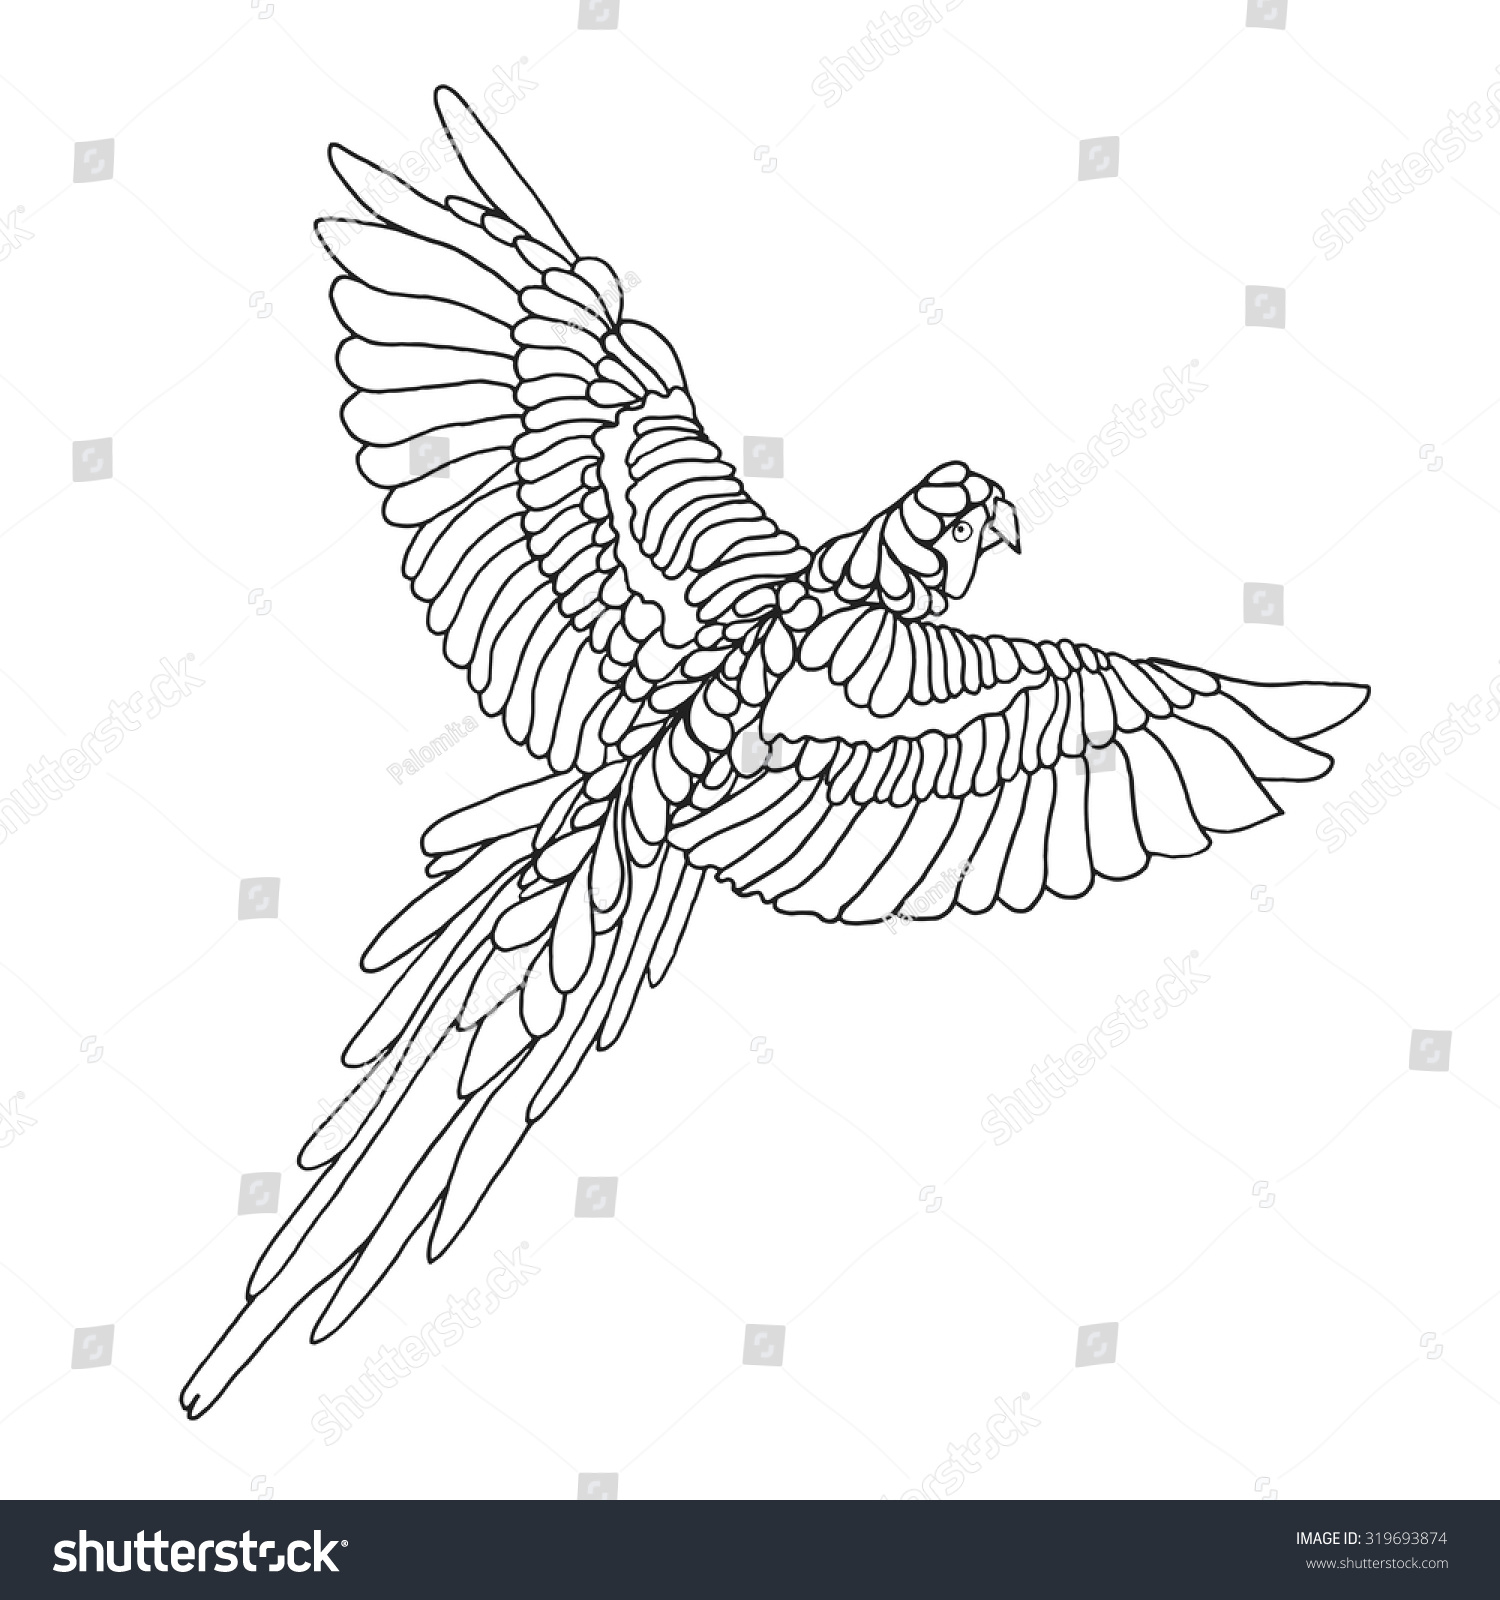 Macaw Parrot Coloring Page Birds Black Stock Vector 319693874 ...